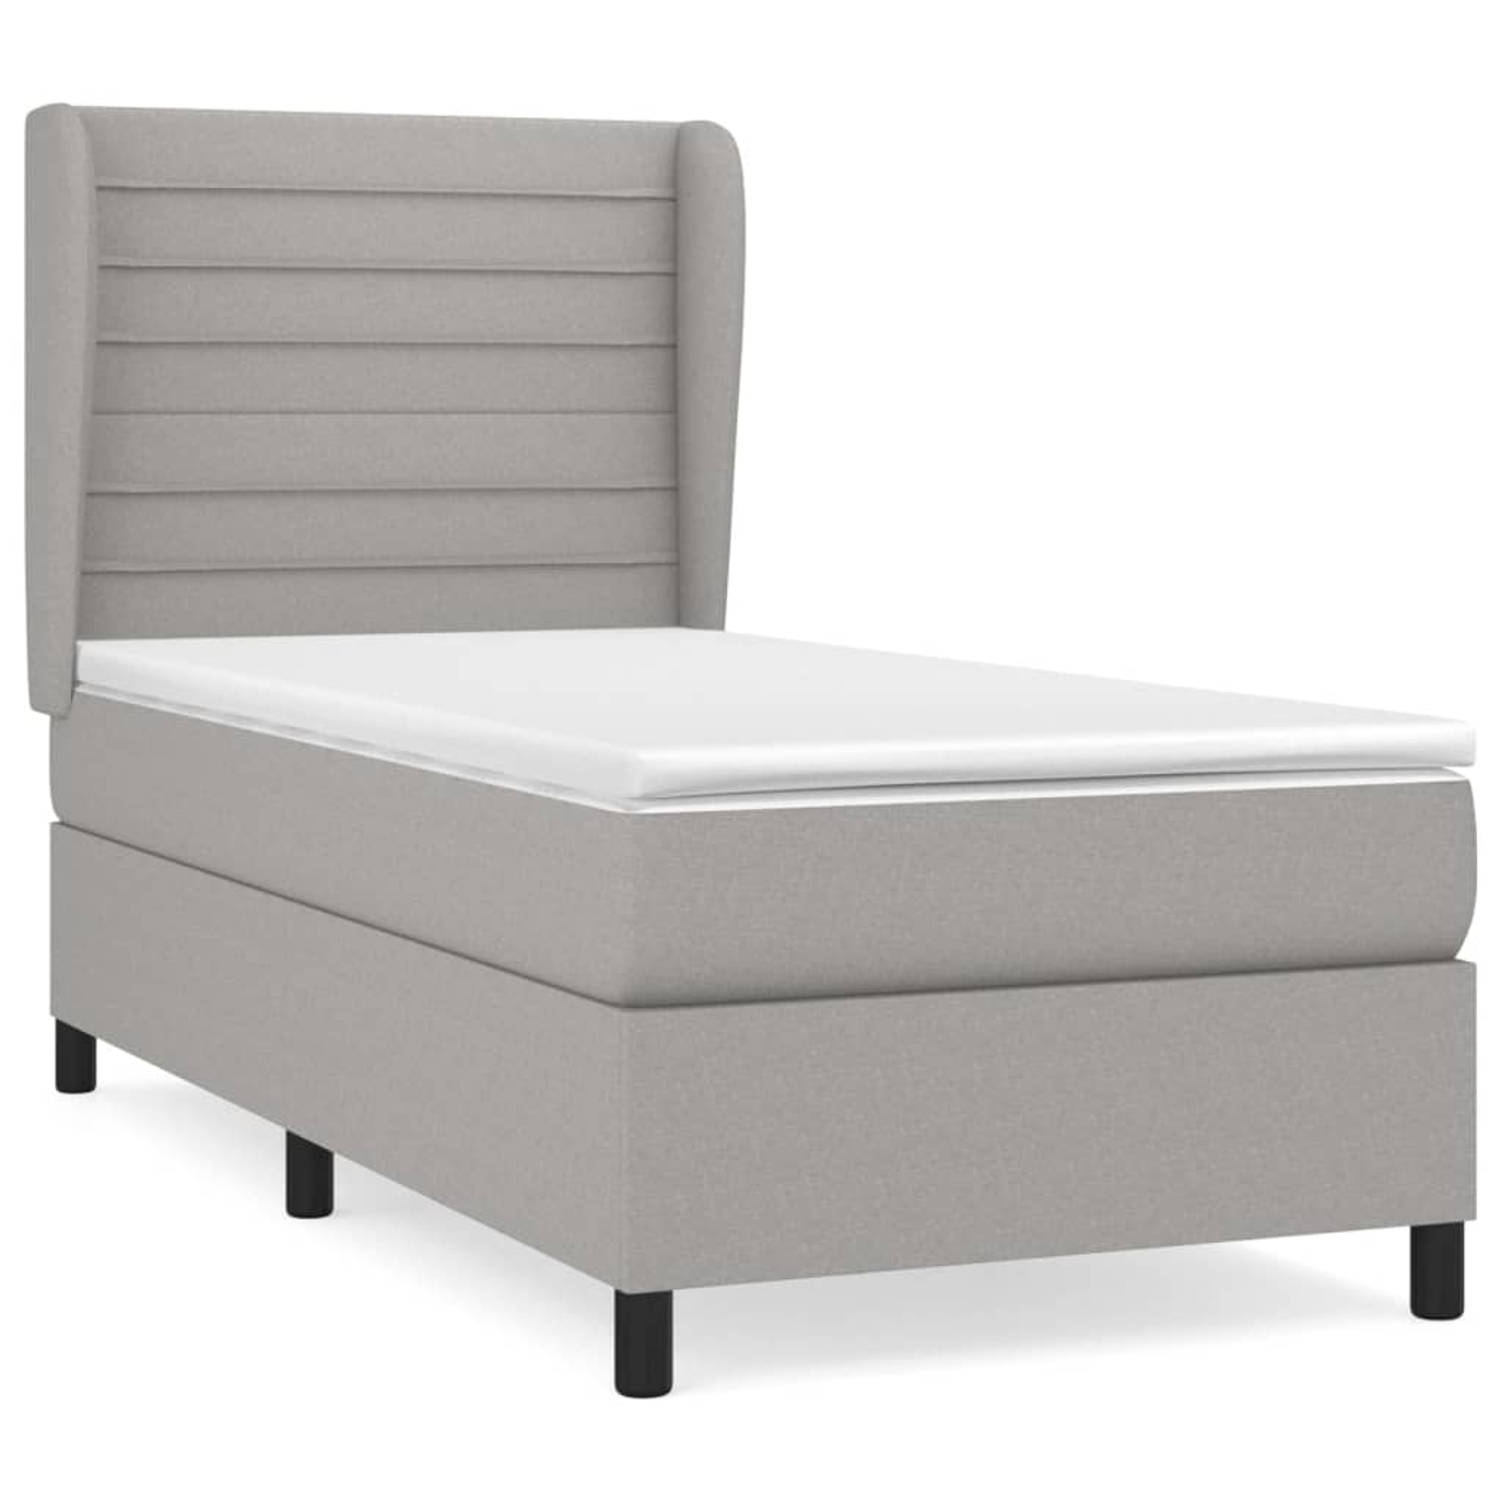 The Living Store Boxspringbed - Deluxe - Bed - 203 x 83 x 118/128 cm - Lichtgrijs